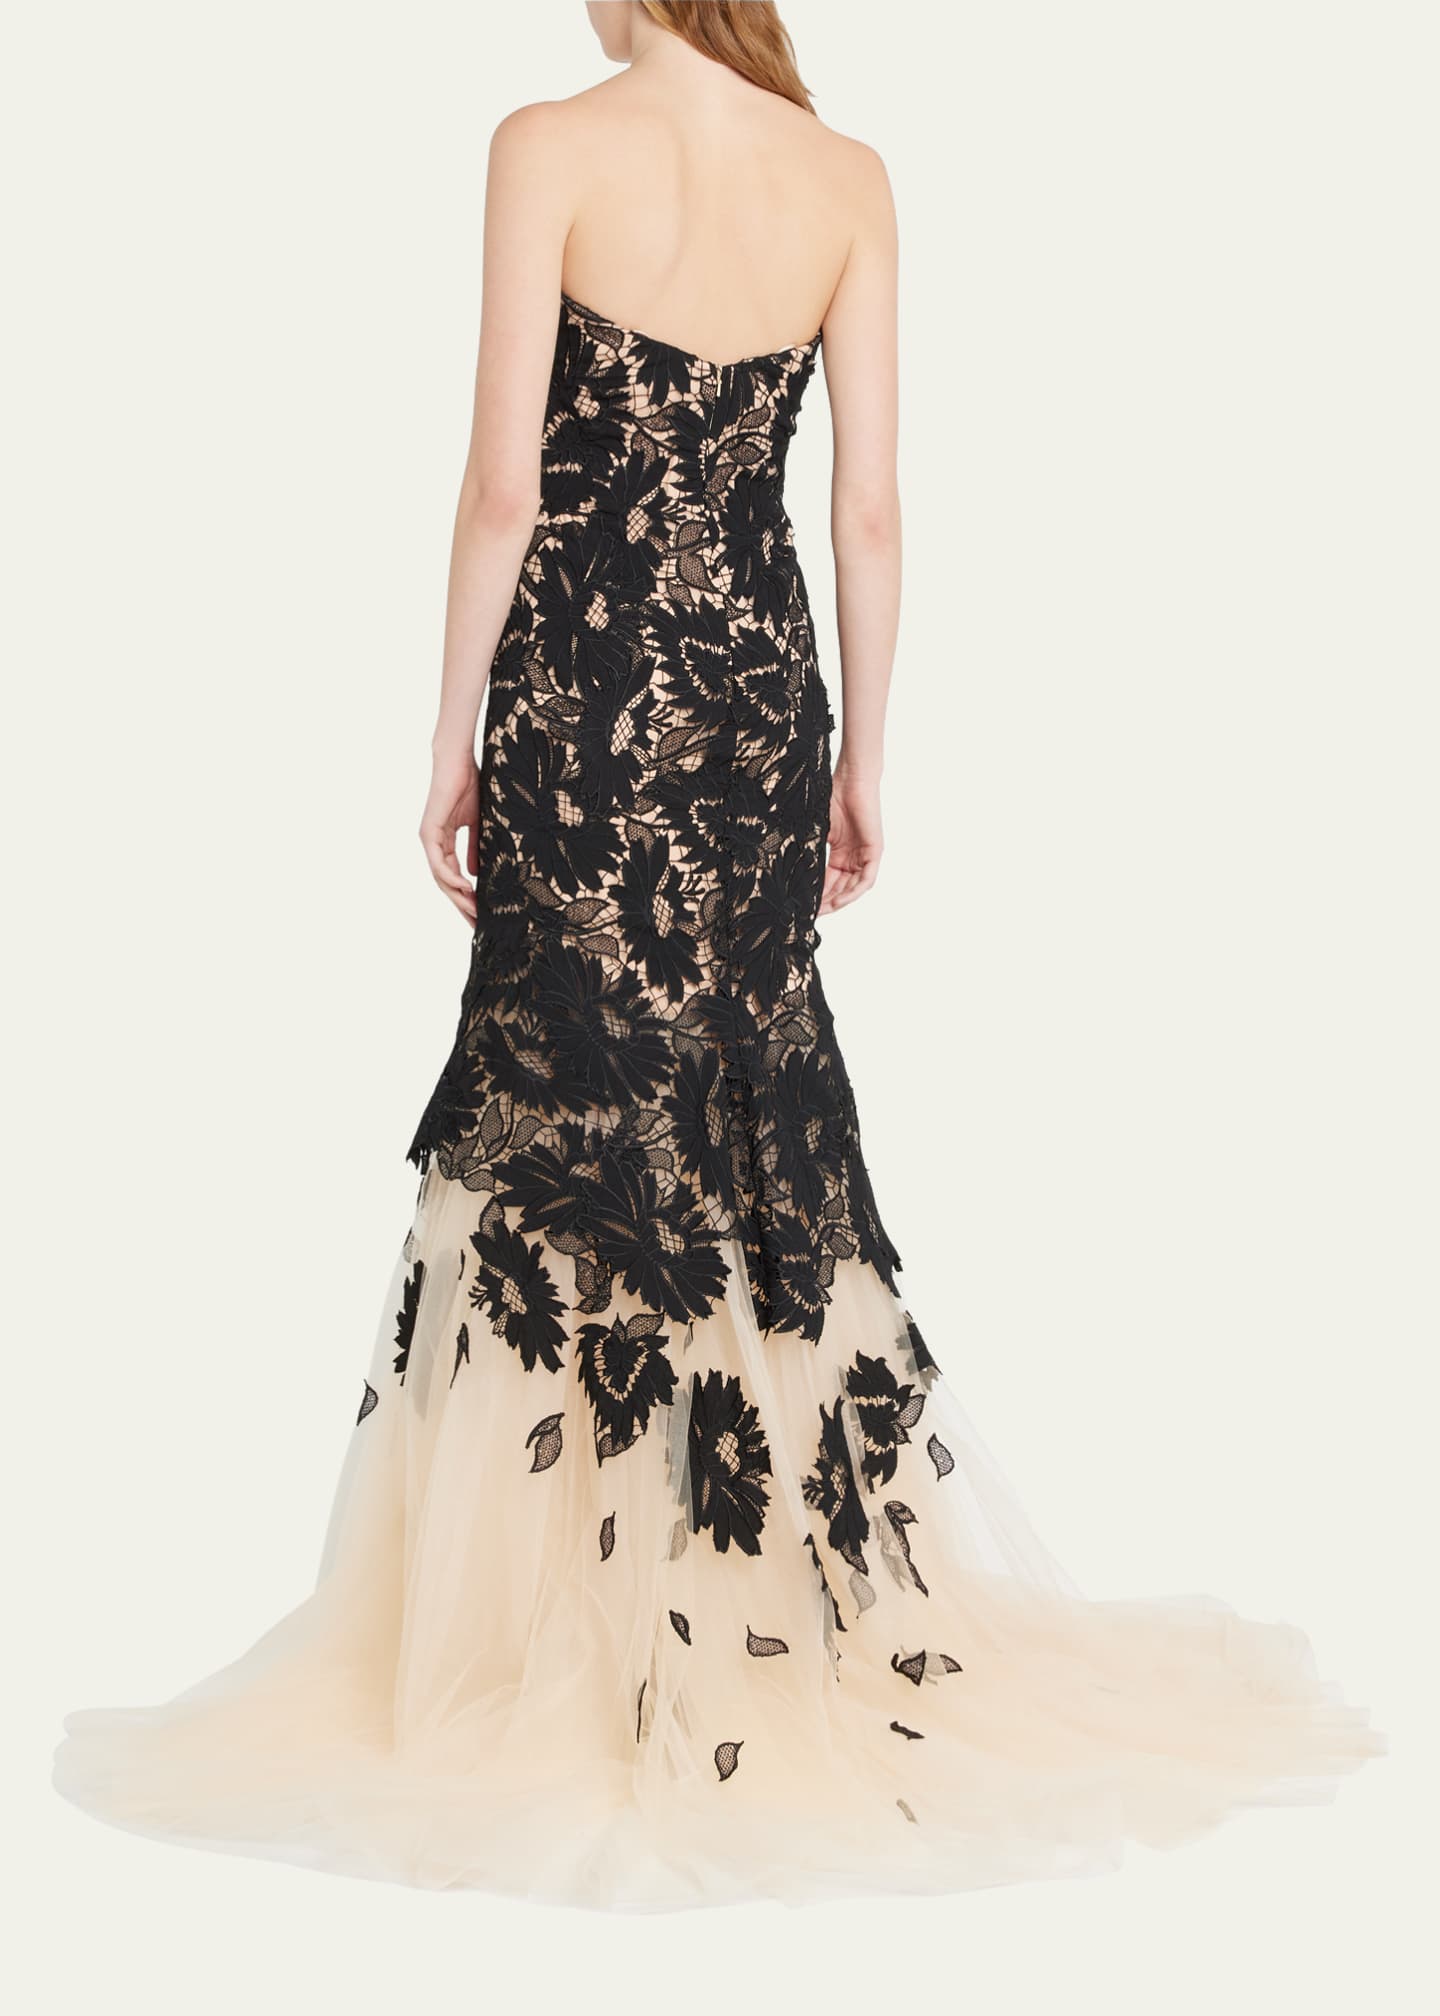 Pamella Roland Strapless Floral Lace Tulle Trumpet Gown - Bergdorf Goodman